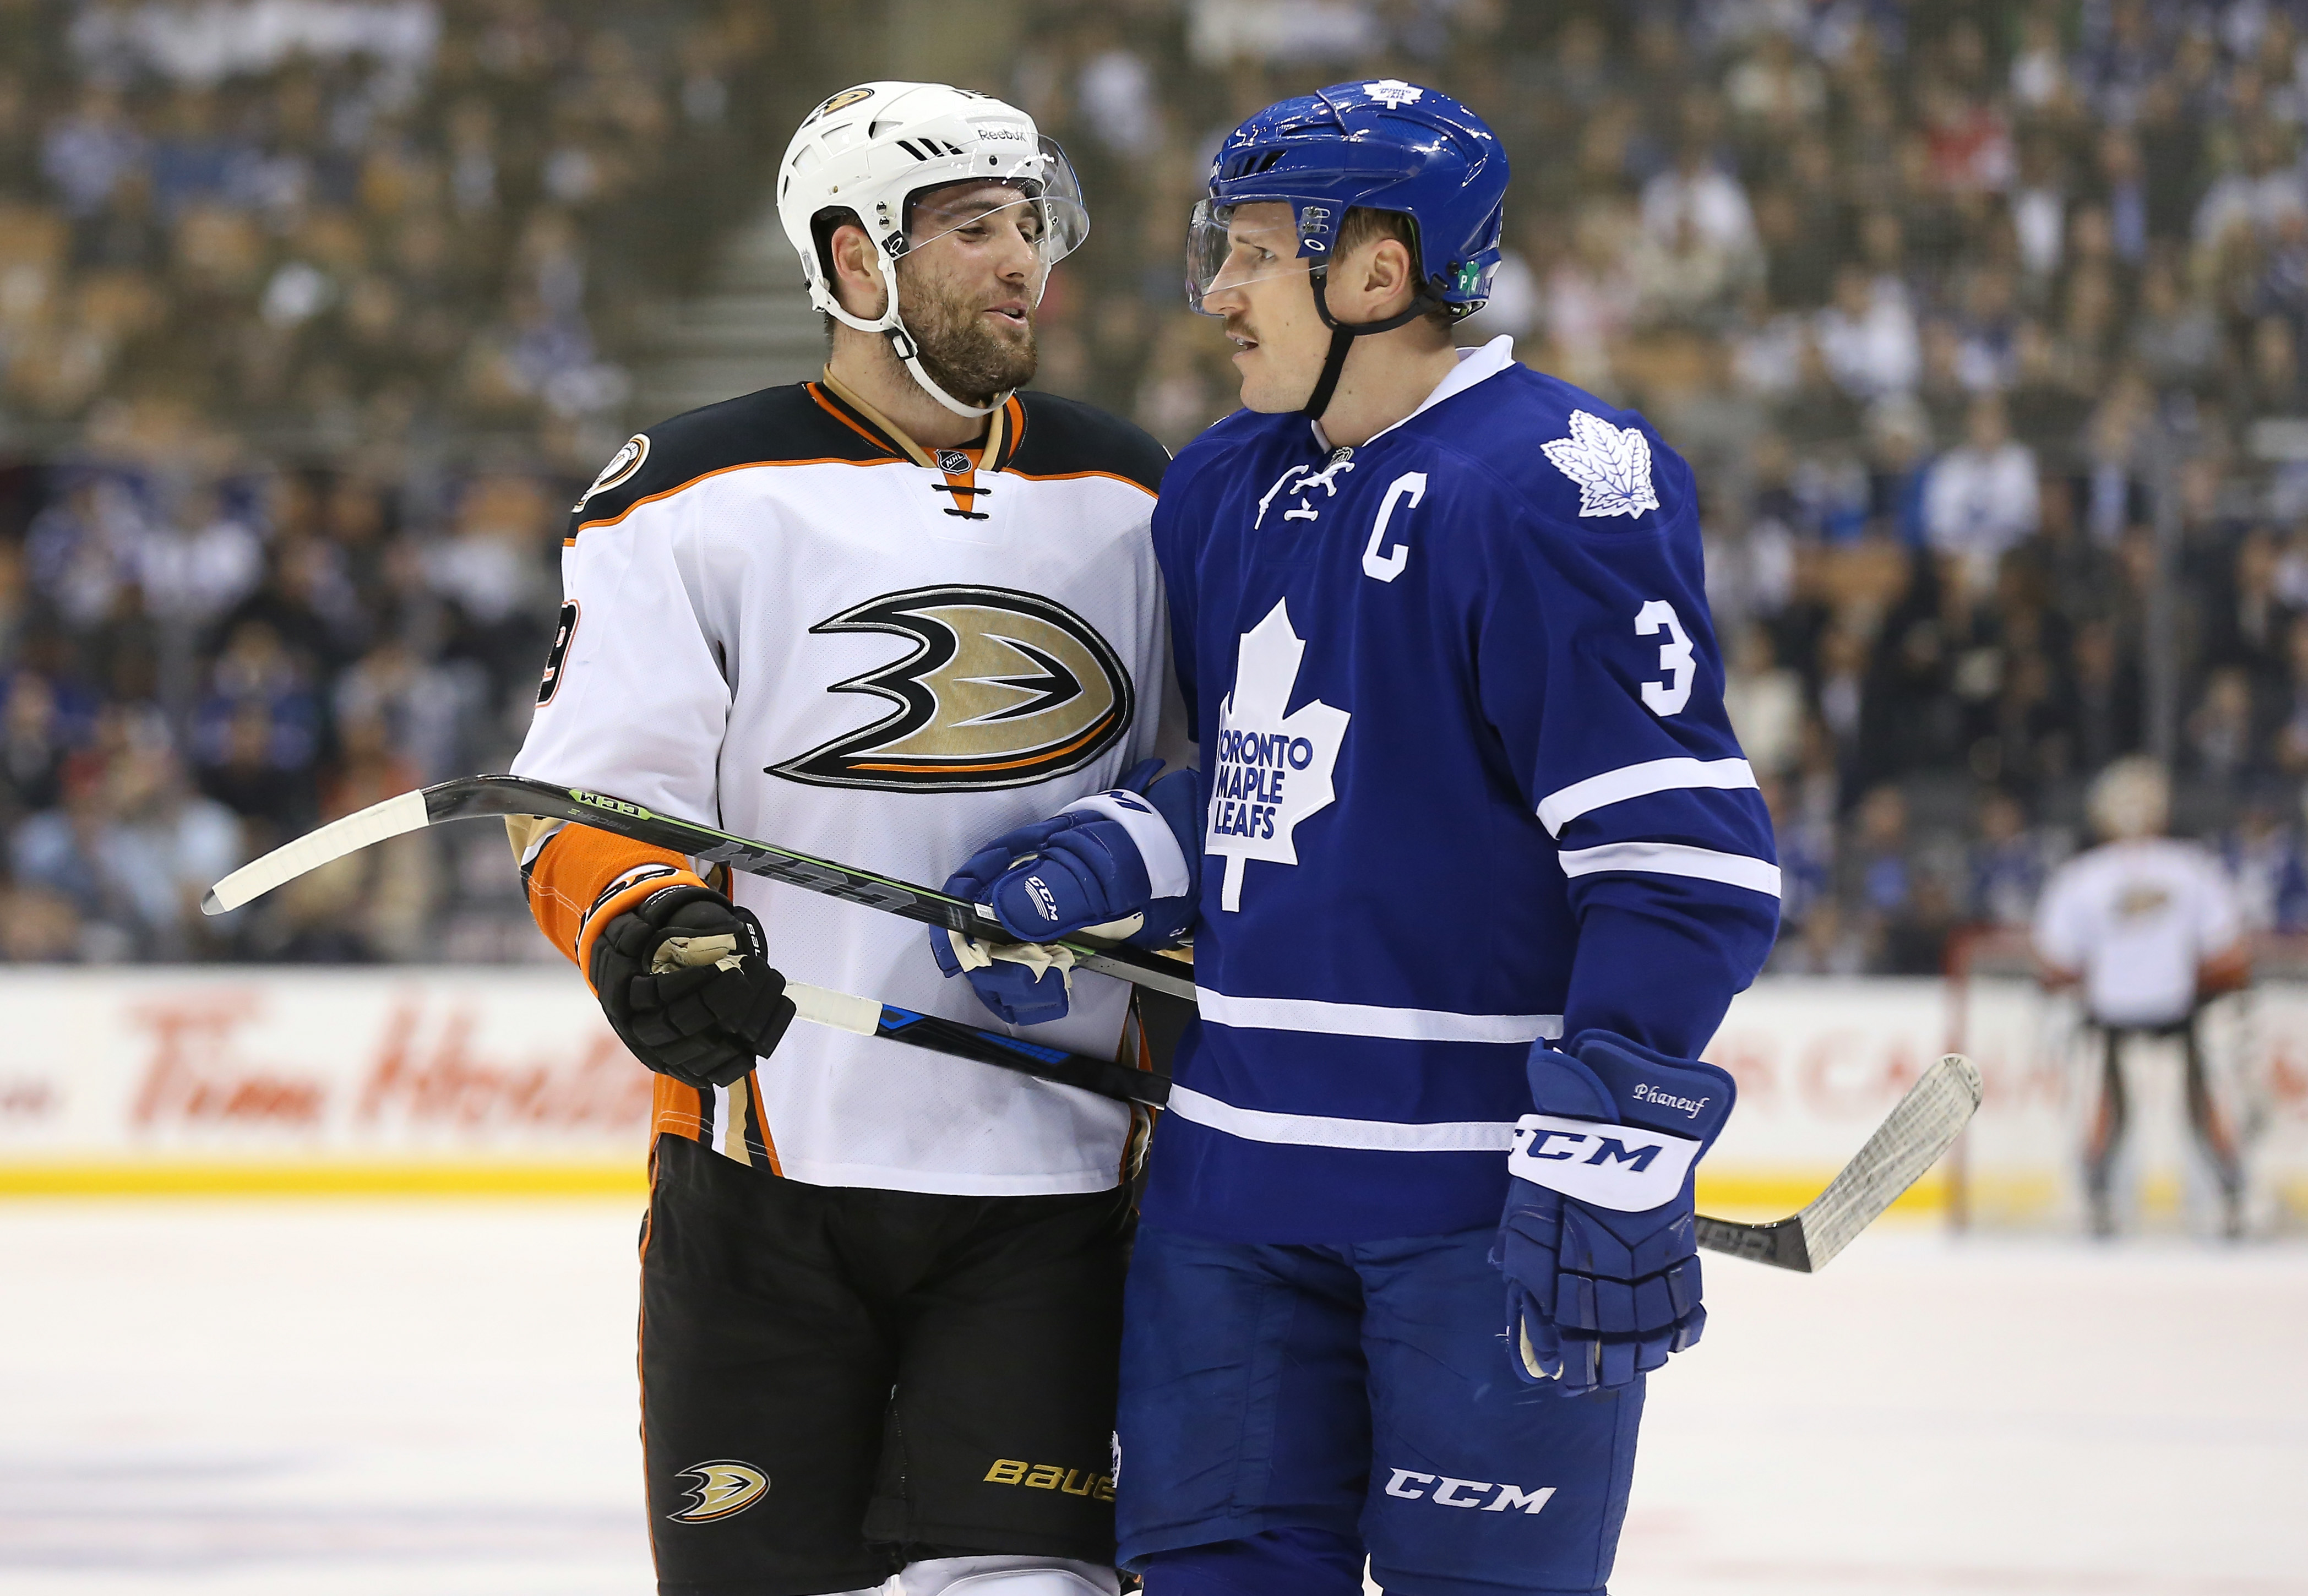 Patrick Maroon shares a word with Dion Phaneuf earlier this season.